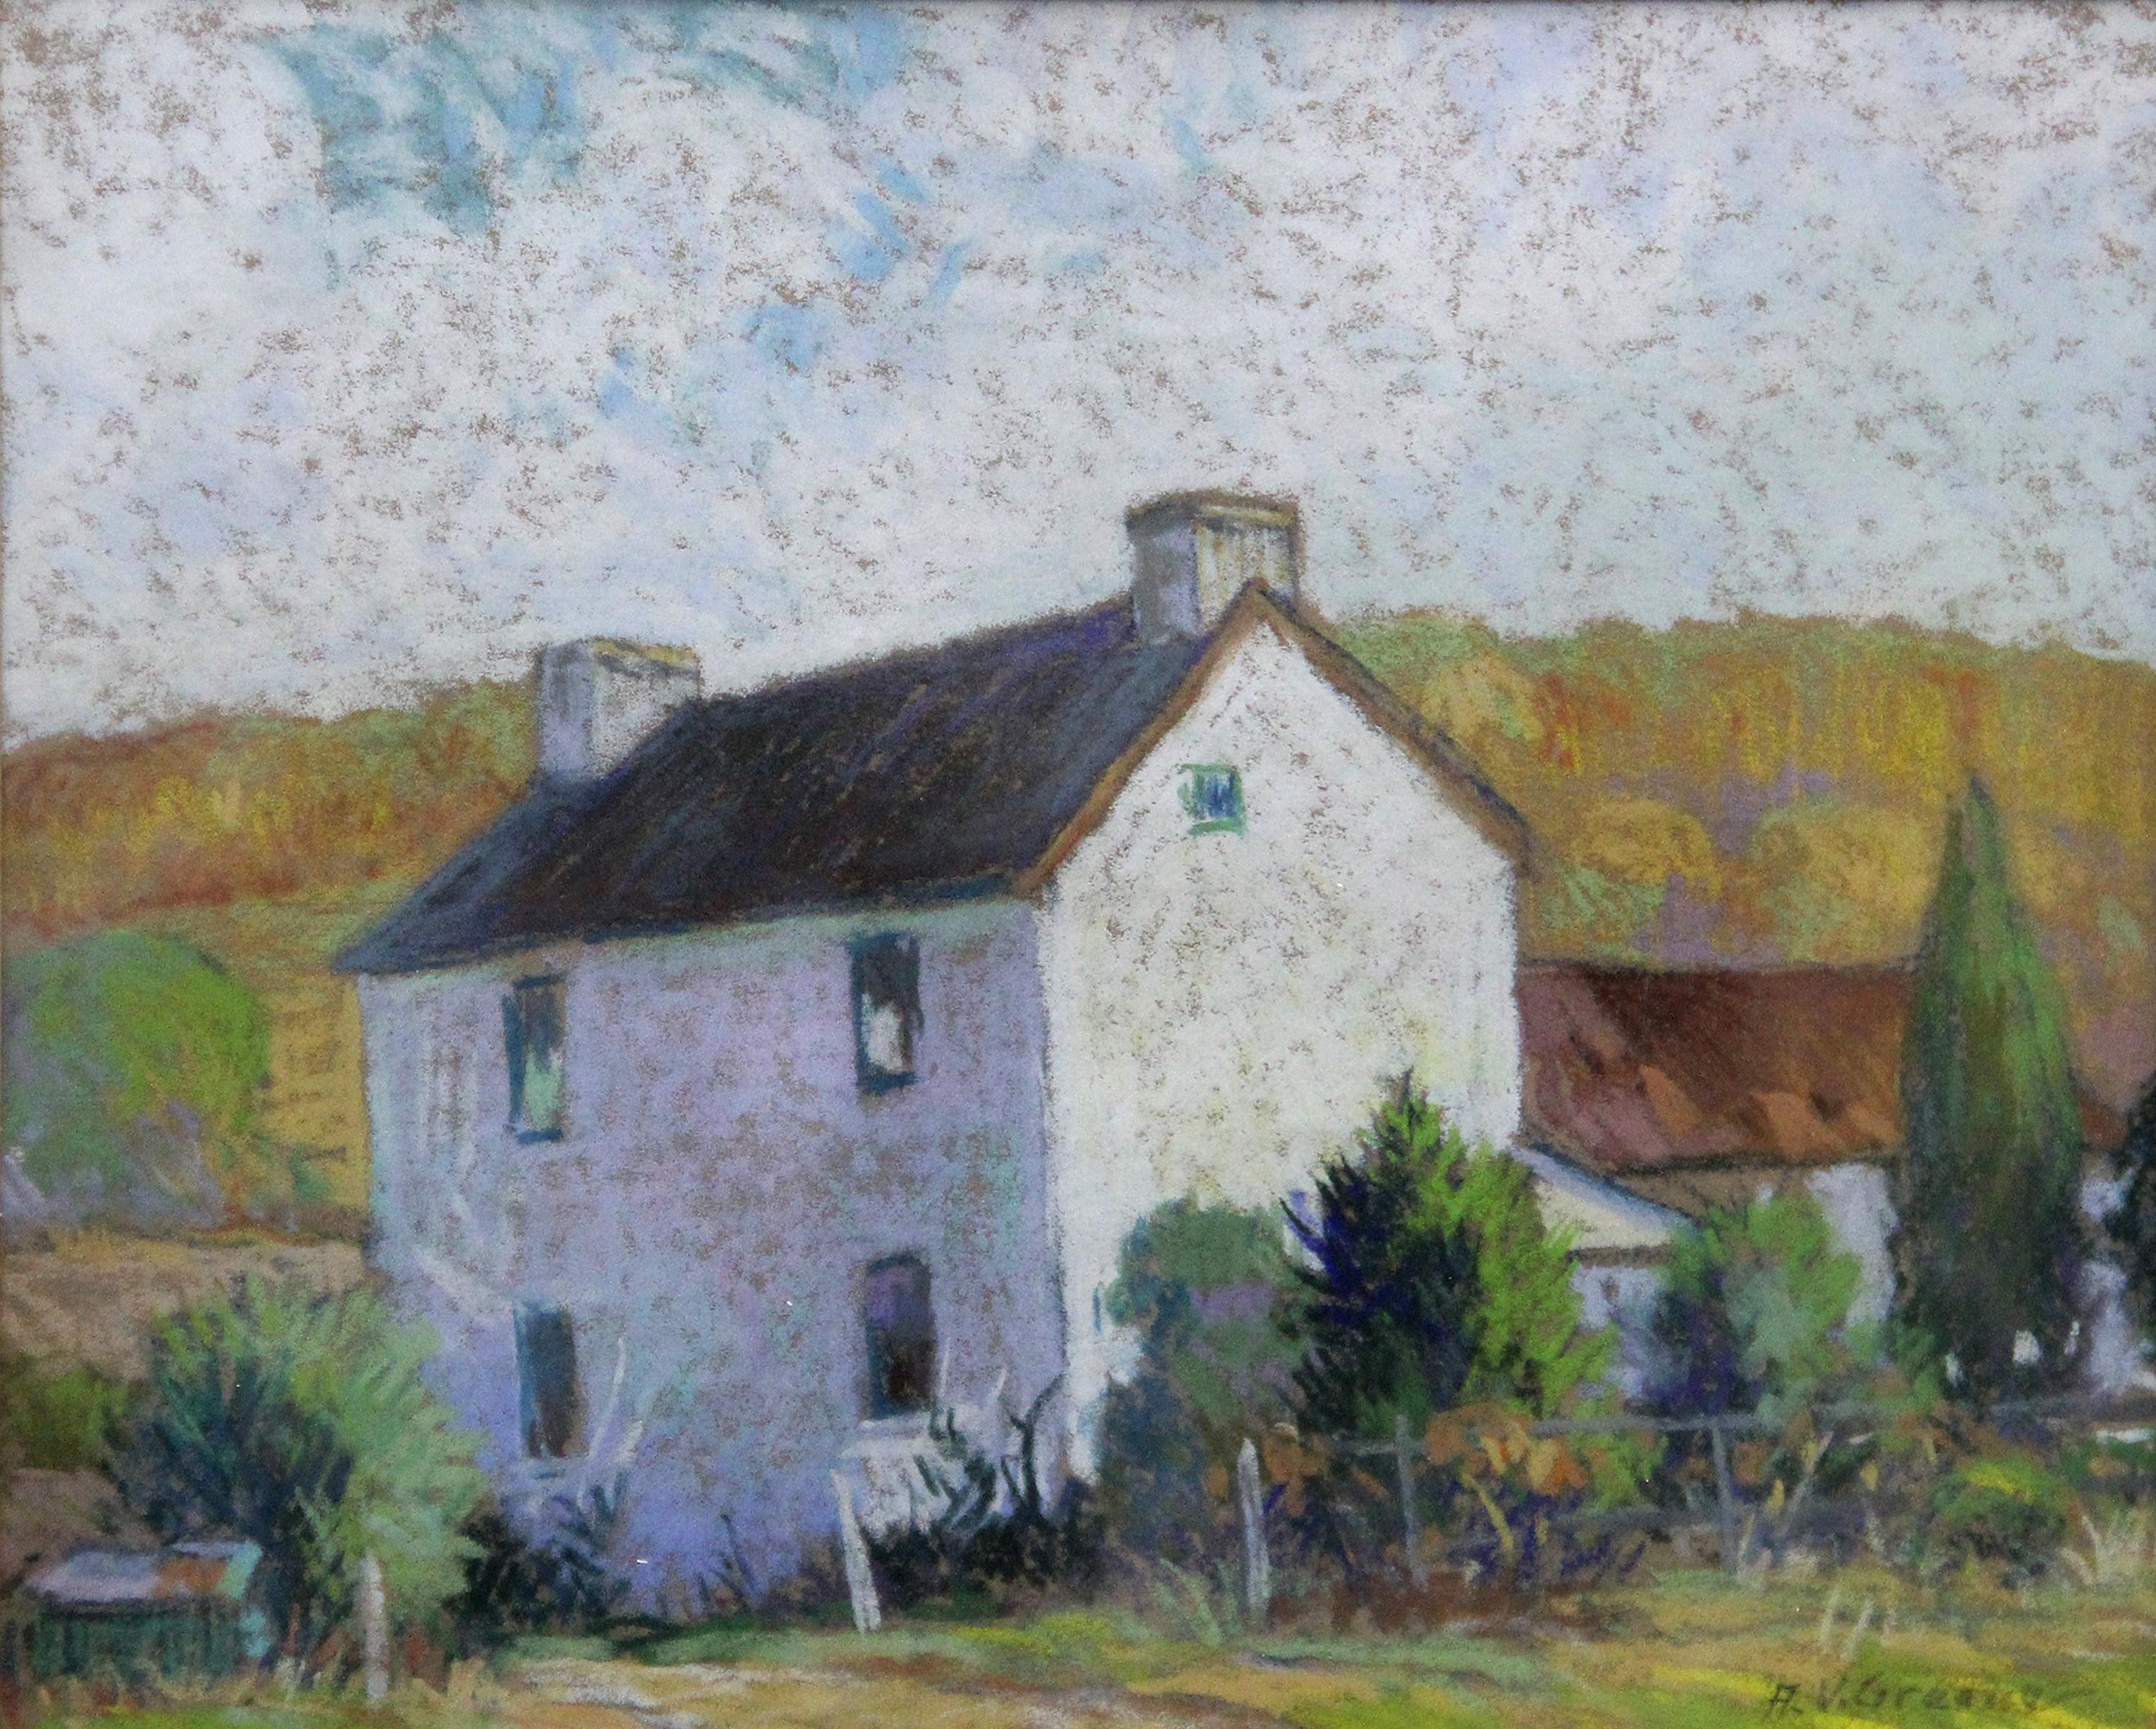 The White House, American Impressionist Landscape with House, Pastel on Paper